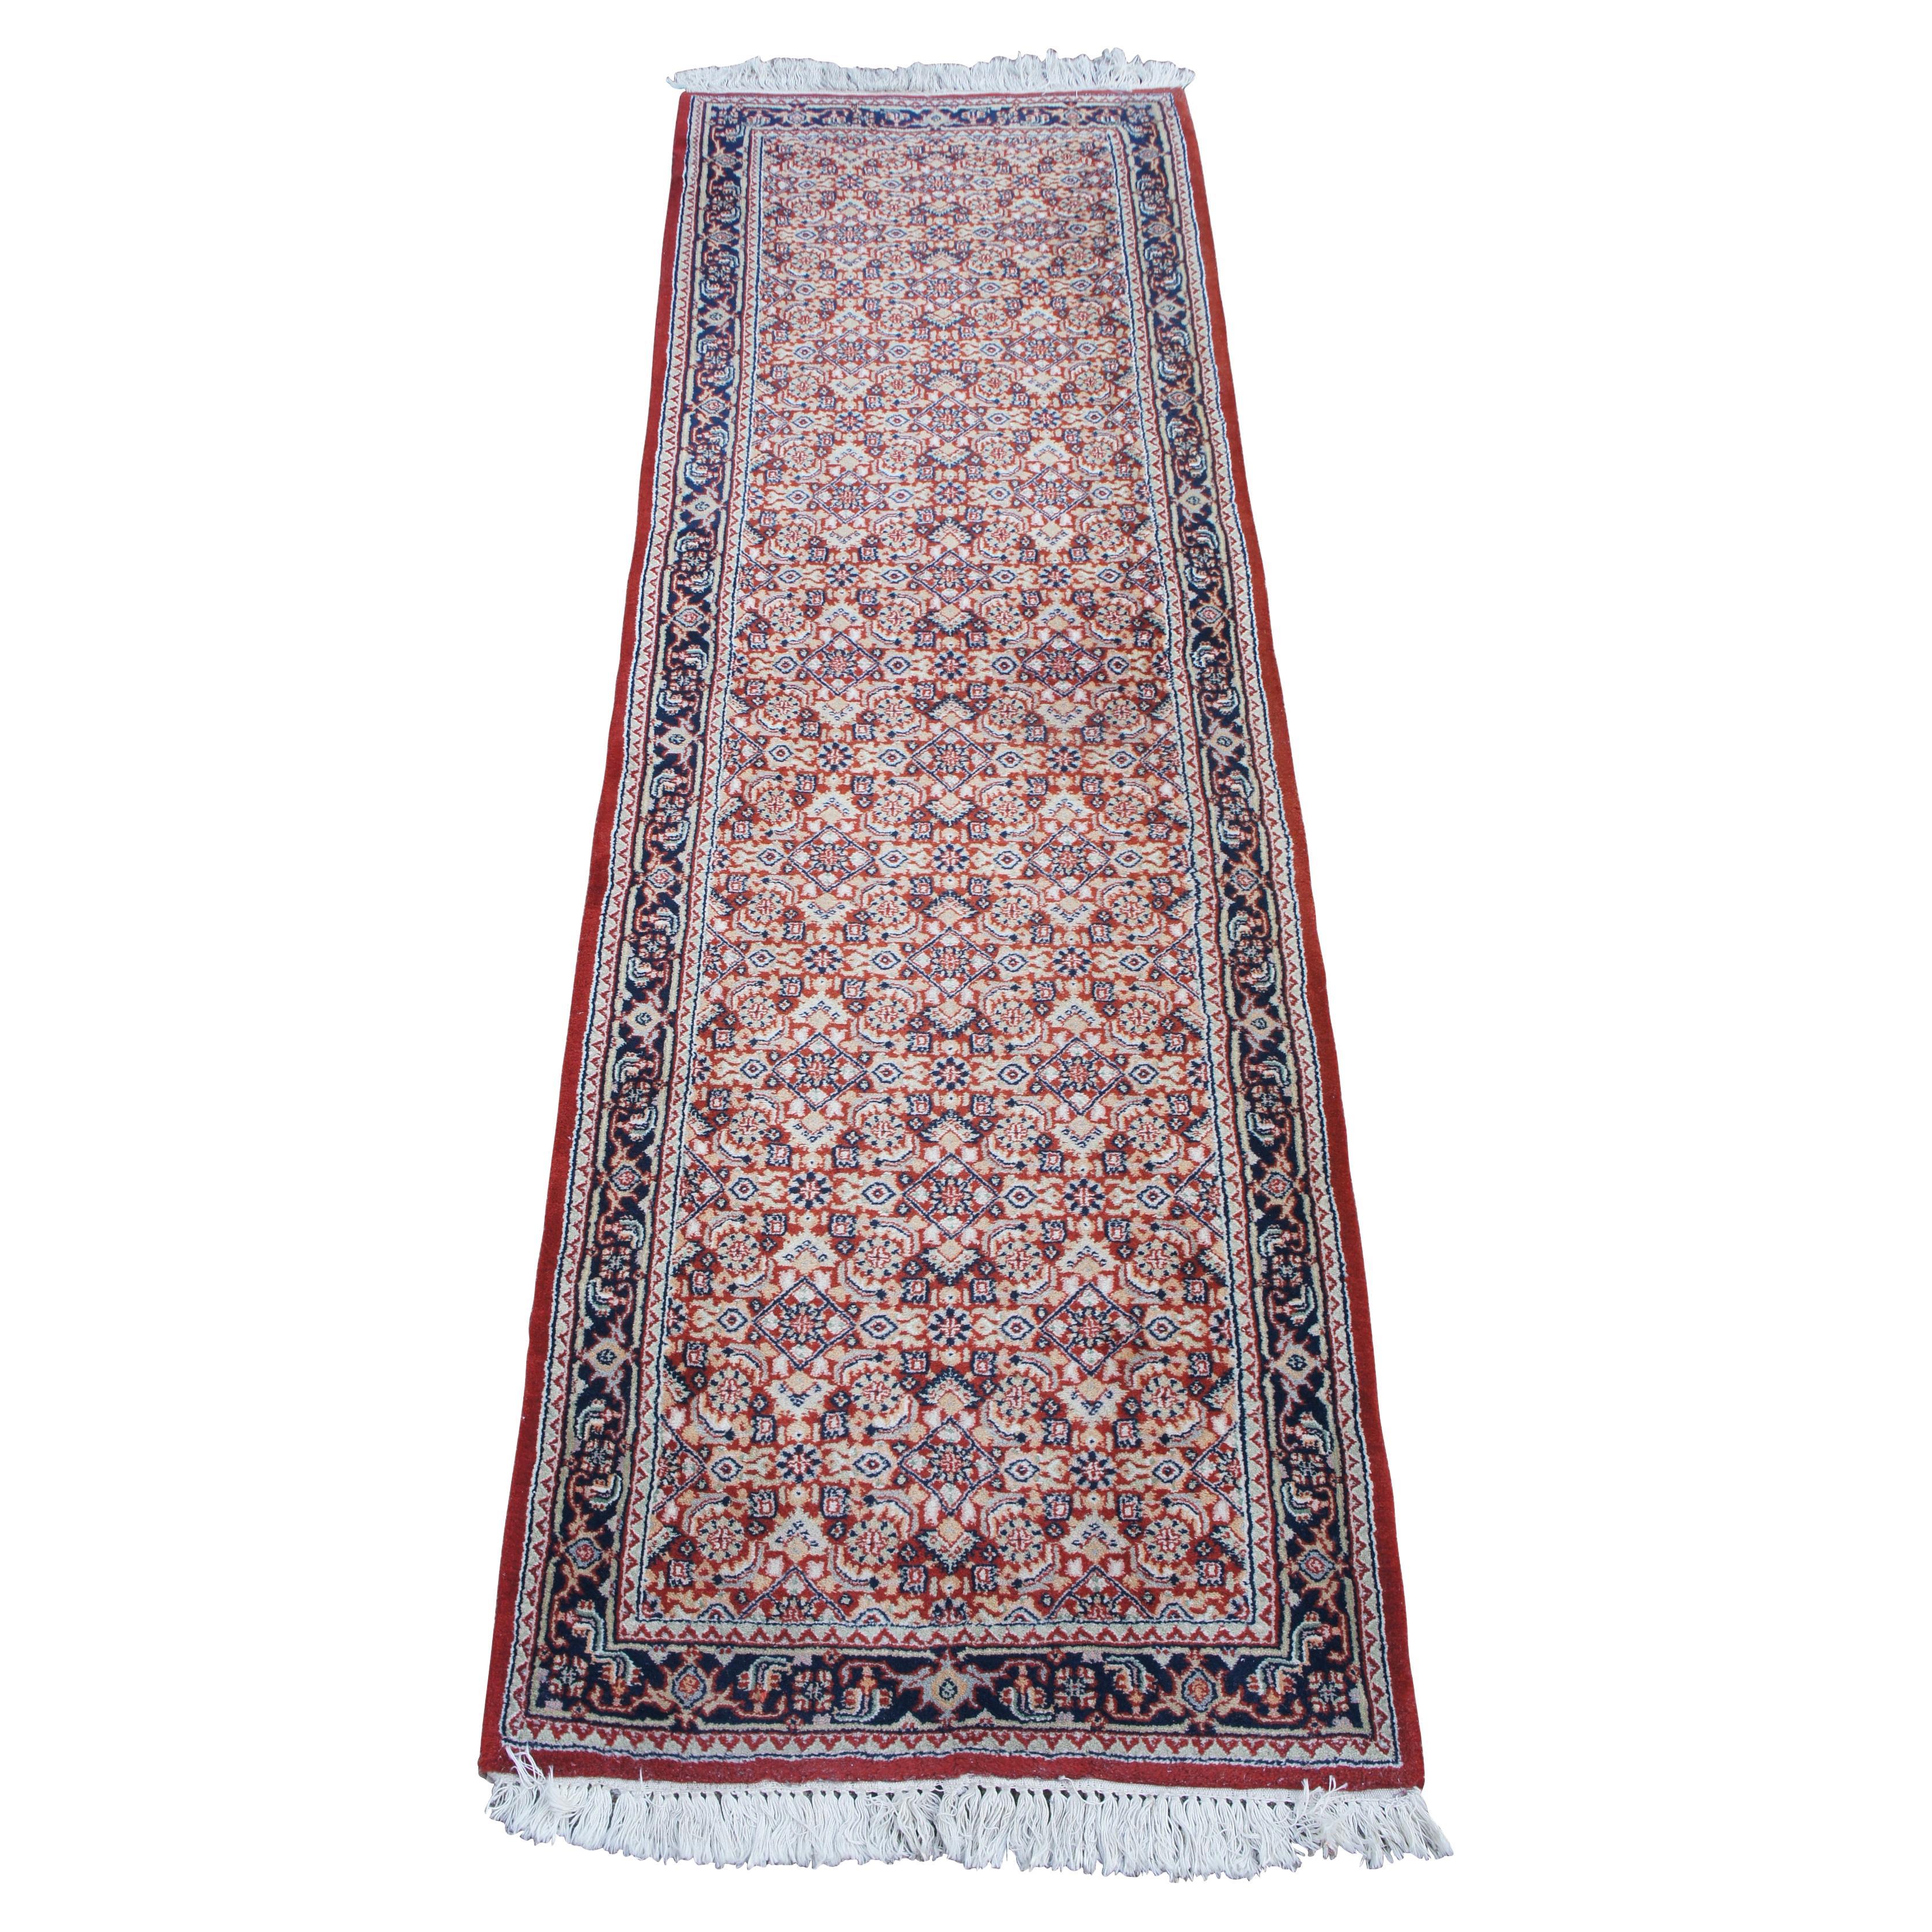 Vintage Indo-Tabriz Hand Knotted Wool Red & Blue Runner Rug 2.5' x 8' For Sale